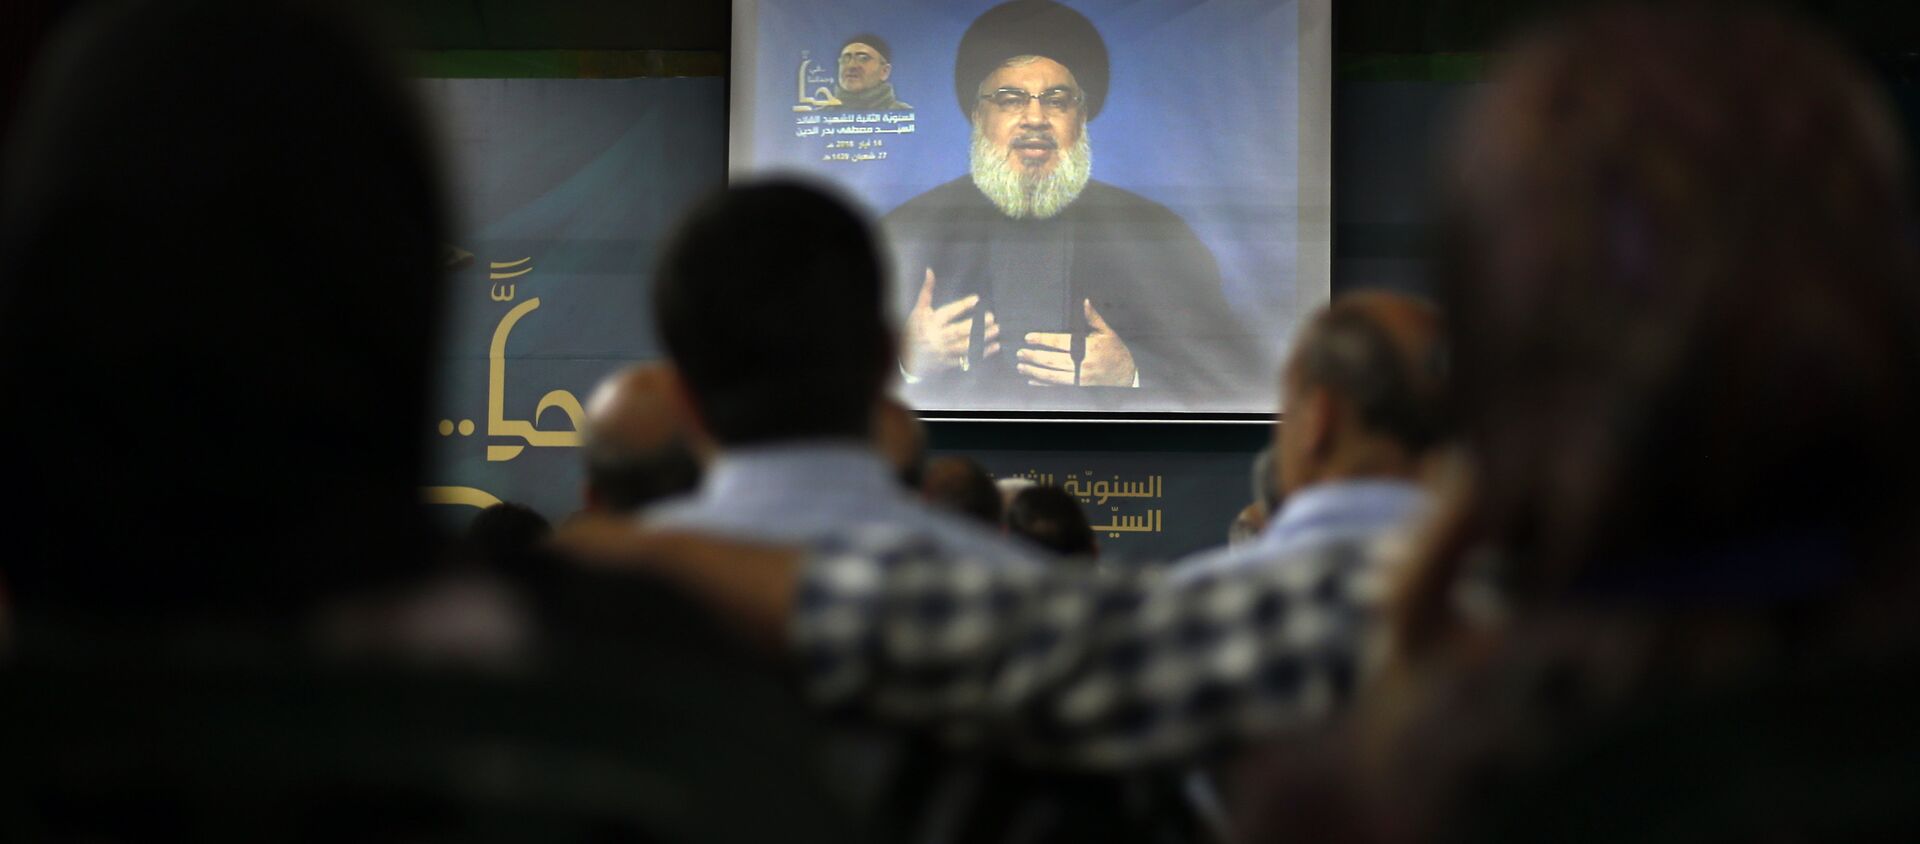 Hezbollah leader Sheik Hassan Nasrallah speaks on a screen via a video link during a ceremony to mark the second anniversary of the death of Hezbollah top commander, Mustafa Badreddine, who was killed in an explosion in Damascus, in the southern suburbs of Beirut, Lebanon, Monday, May 14, 2018 - Sputnik International, 1920, 01.04.2021